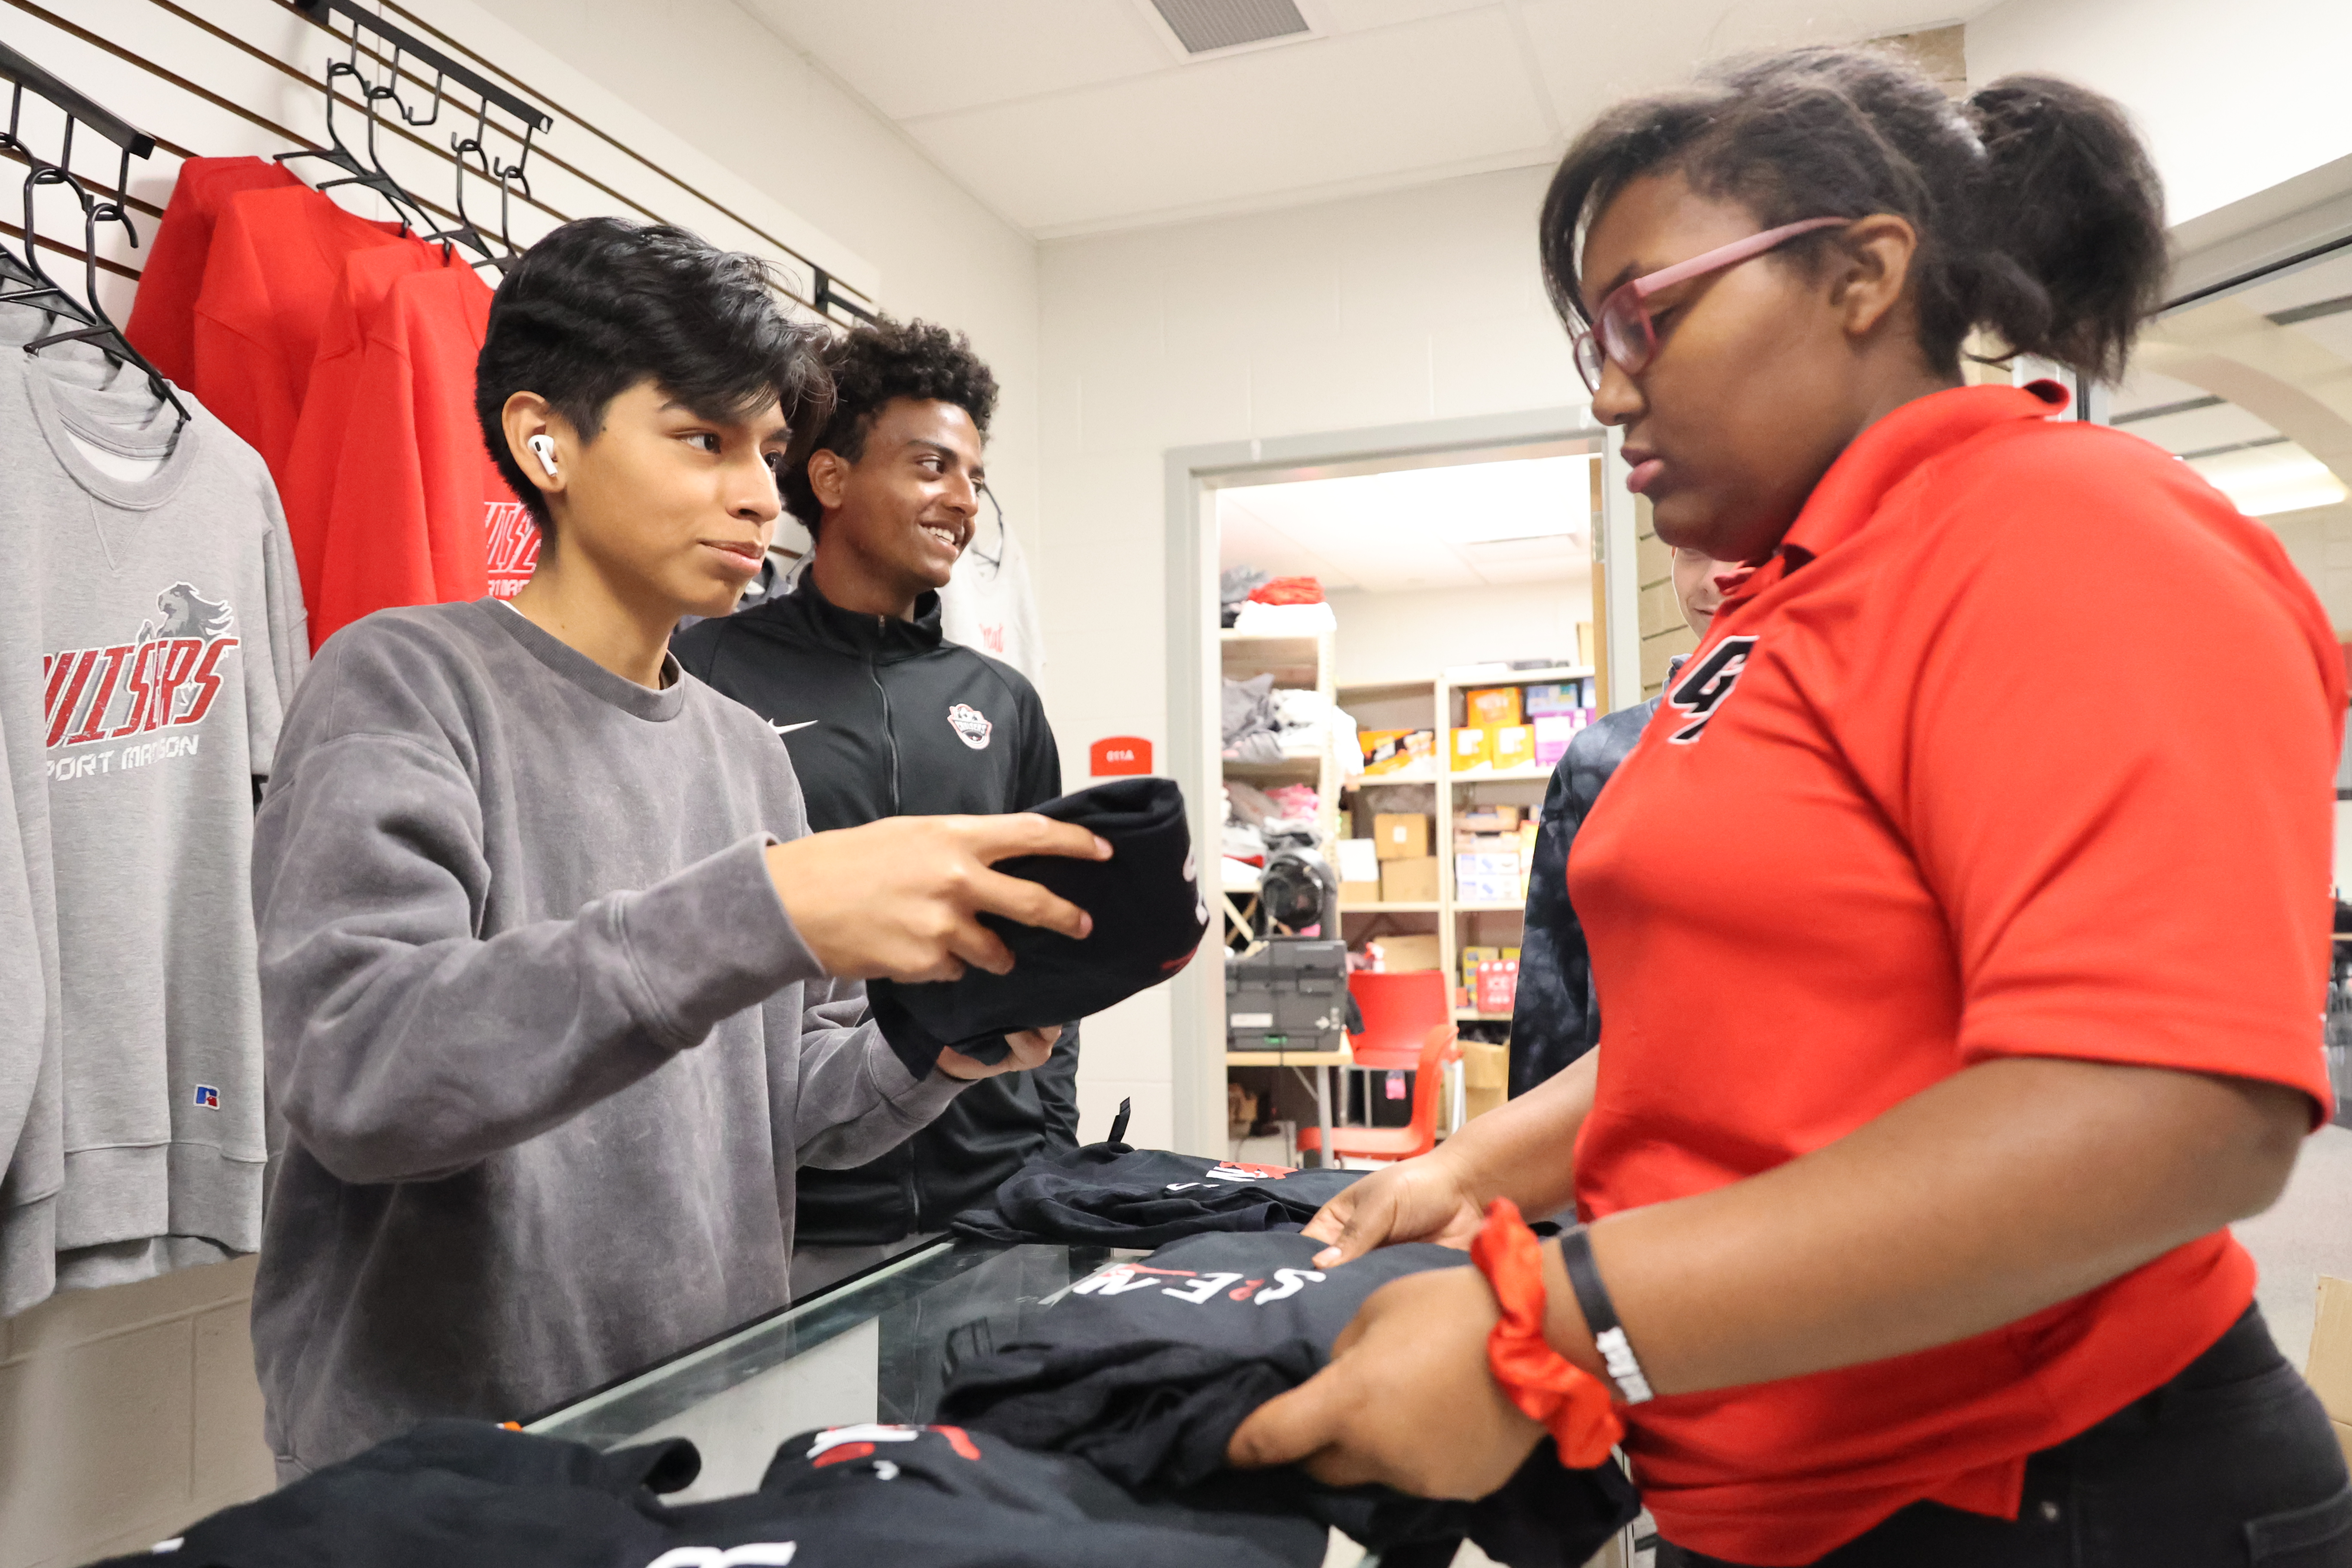 A Hispanic male student and a Black female student are organizing items on the counter before putting them on display.